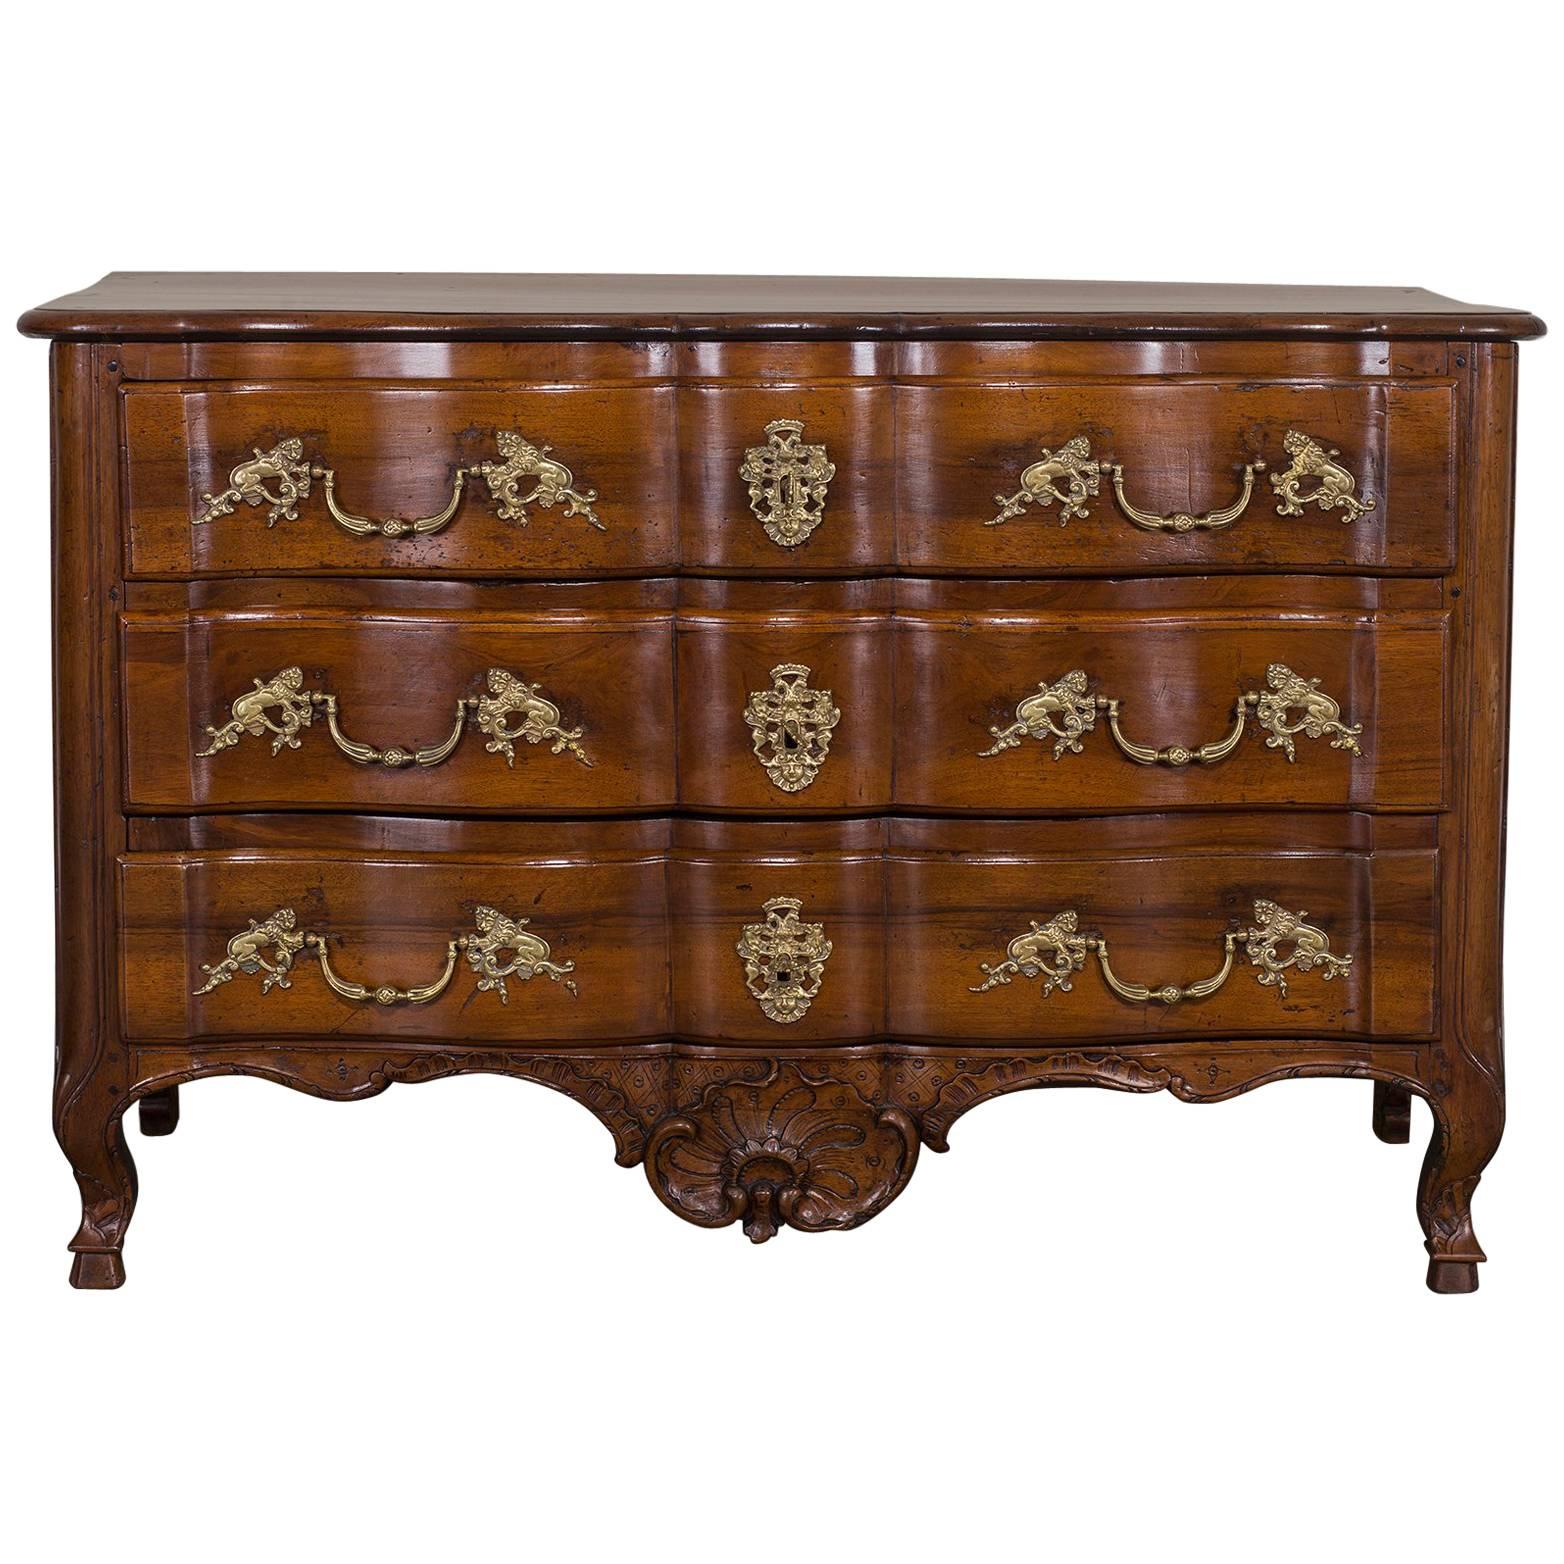 Antique French Louis XV Walnut Chest of Drawers, Arbalette Front, circa 1765